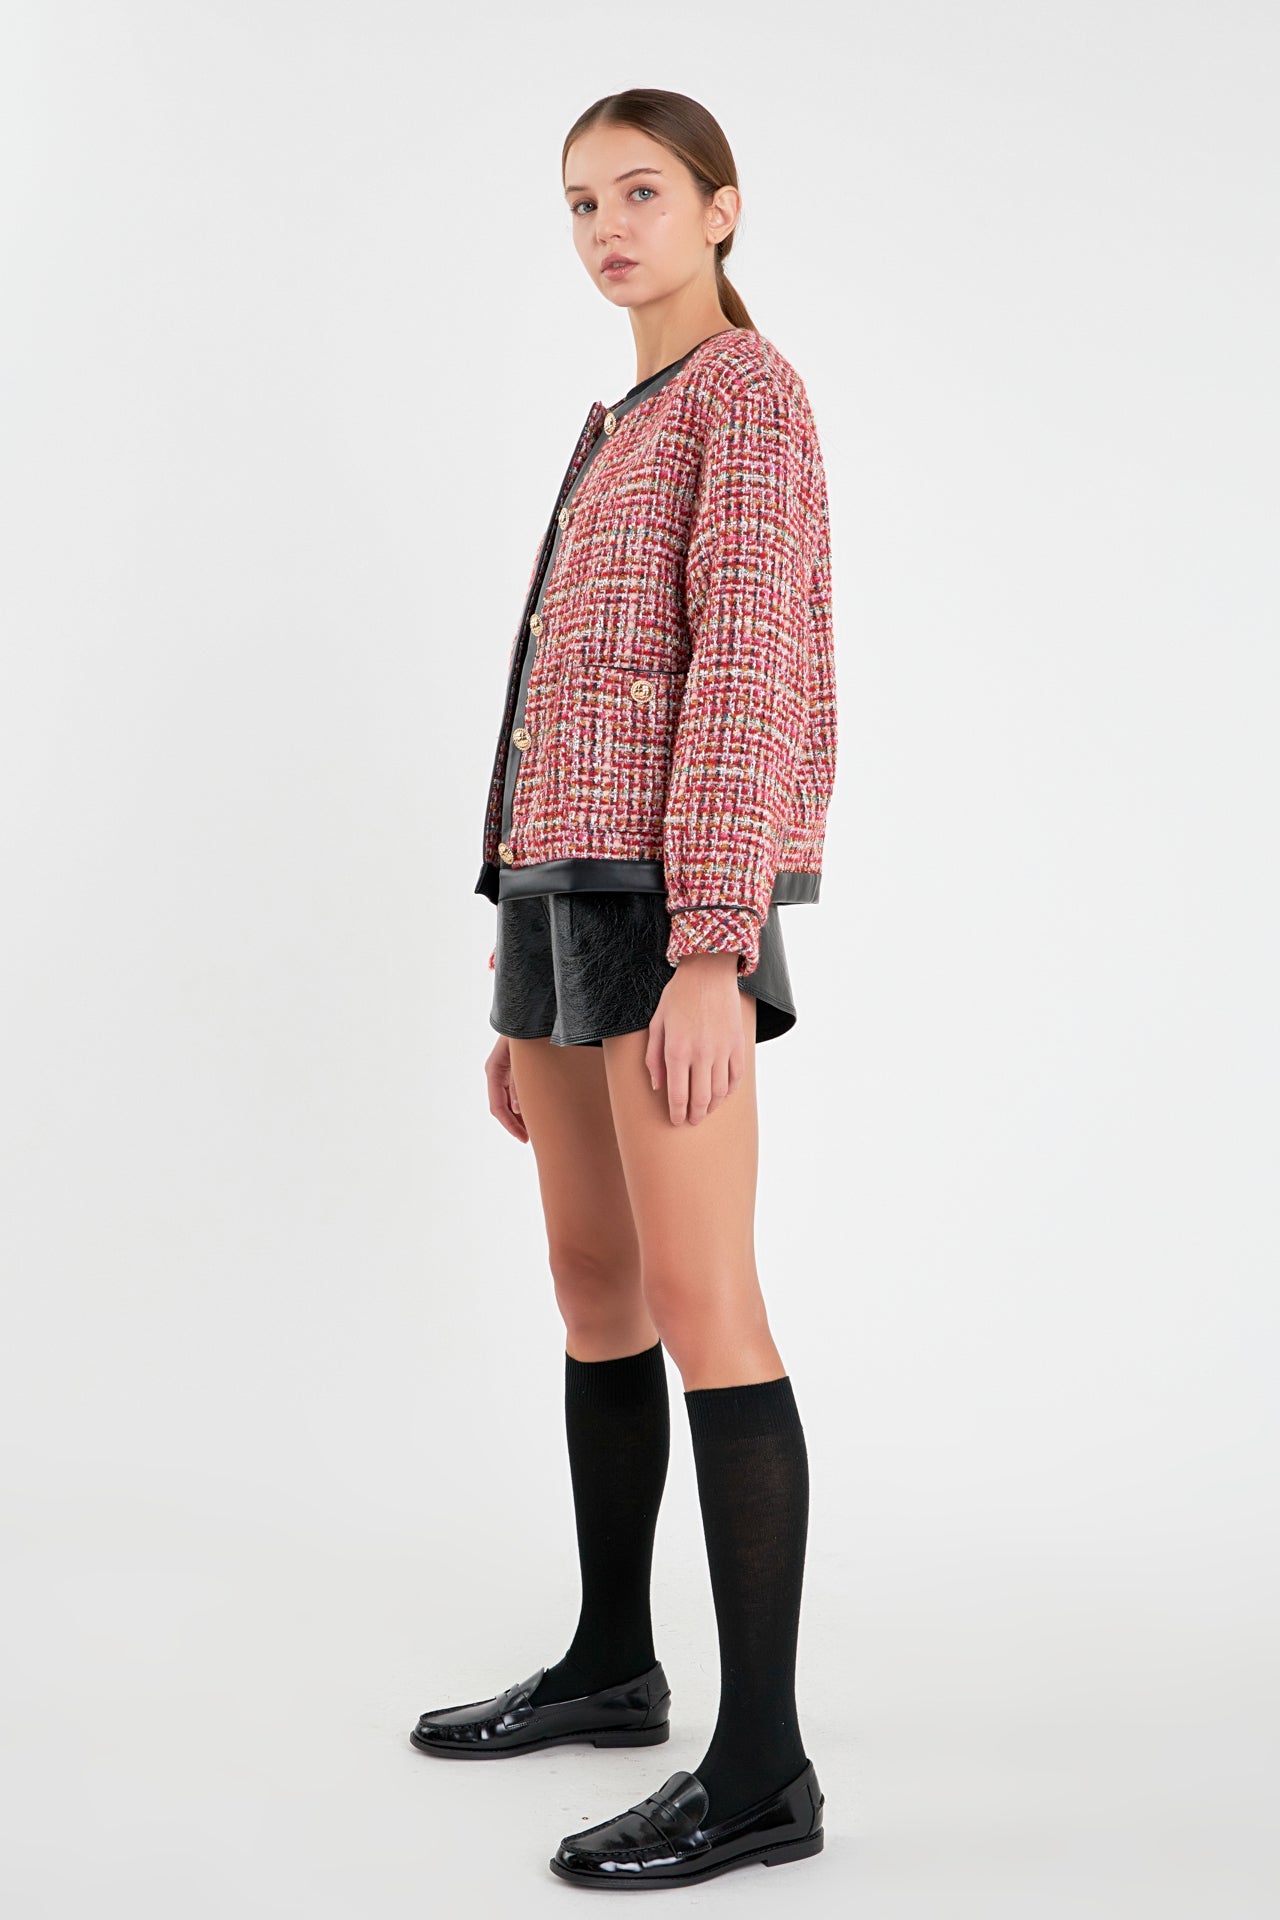 ENGLISH FACTORY - Faux Leather Trim Tweed Jacket - JACKETS available at Objectrare